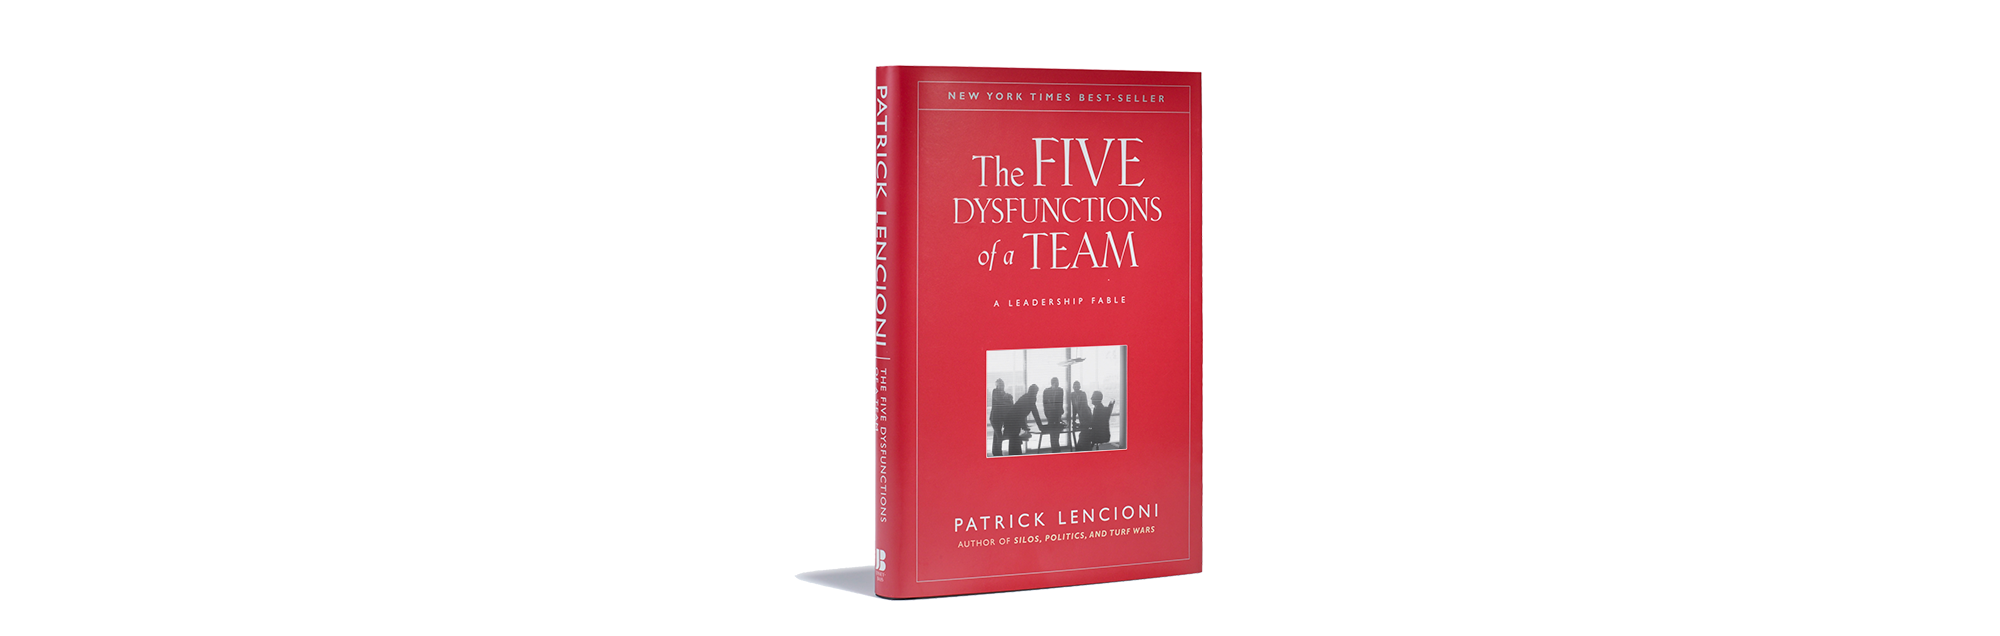 "The Five Dysfunctions of a Team: A Leadership Fable" by Patrick Lencioni: a review